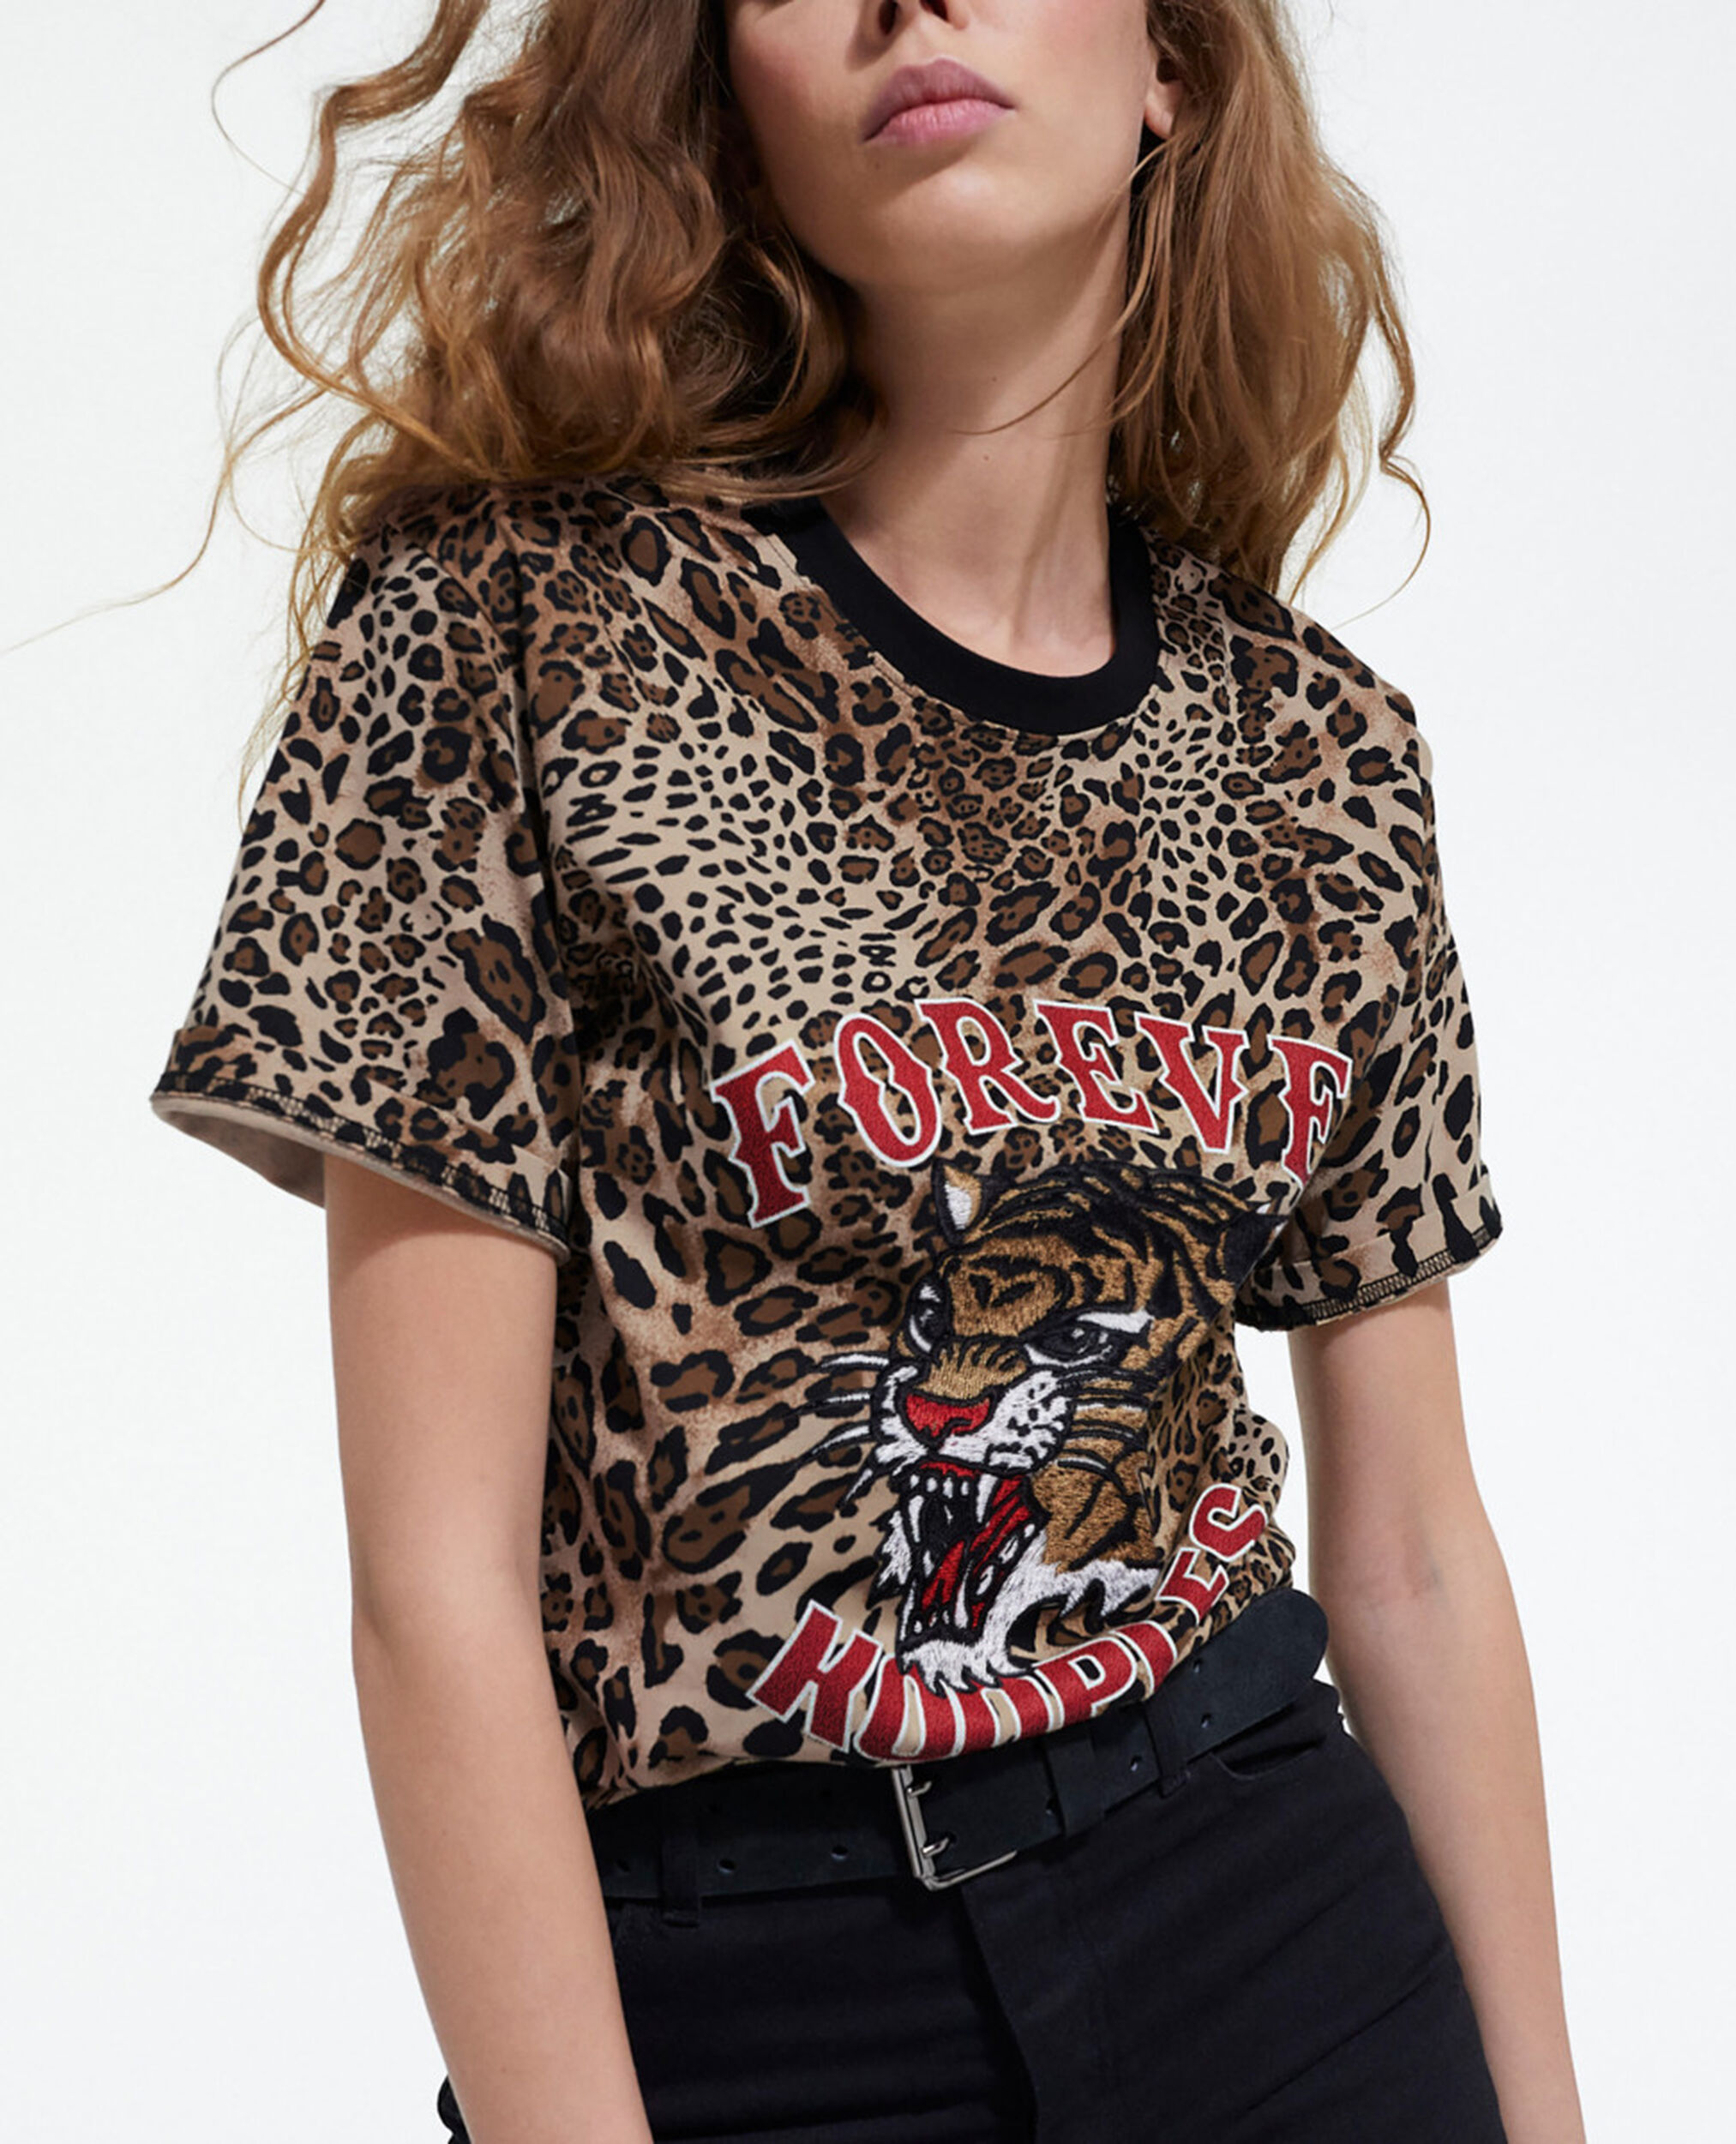 Baumwoll-T-Shirt mit Leopardenmuster, LEOPARD, hi-res image number null